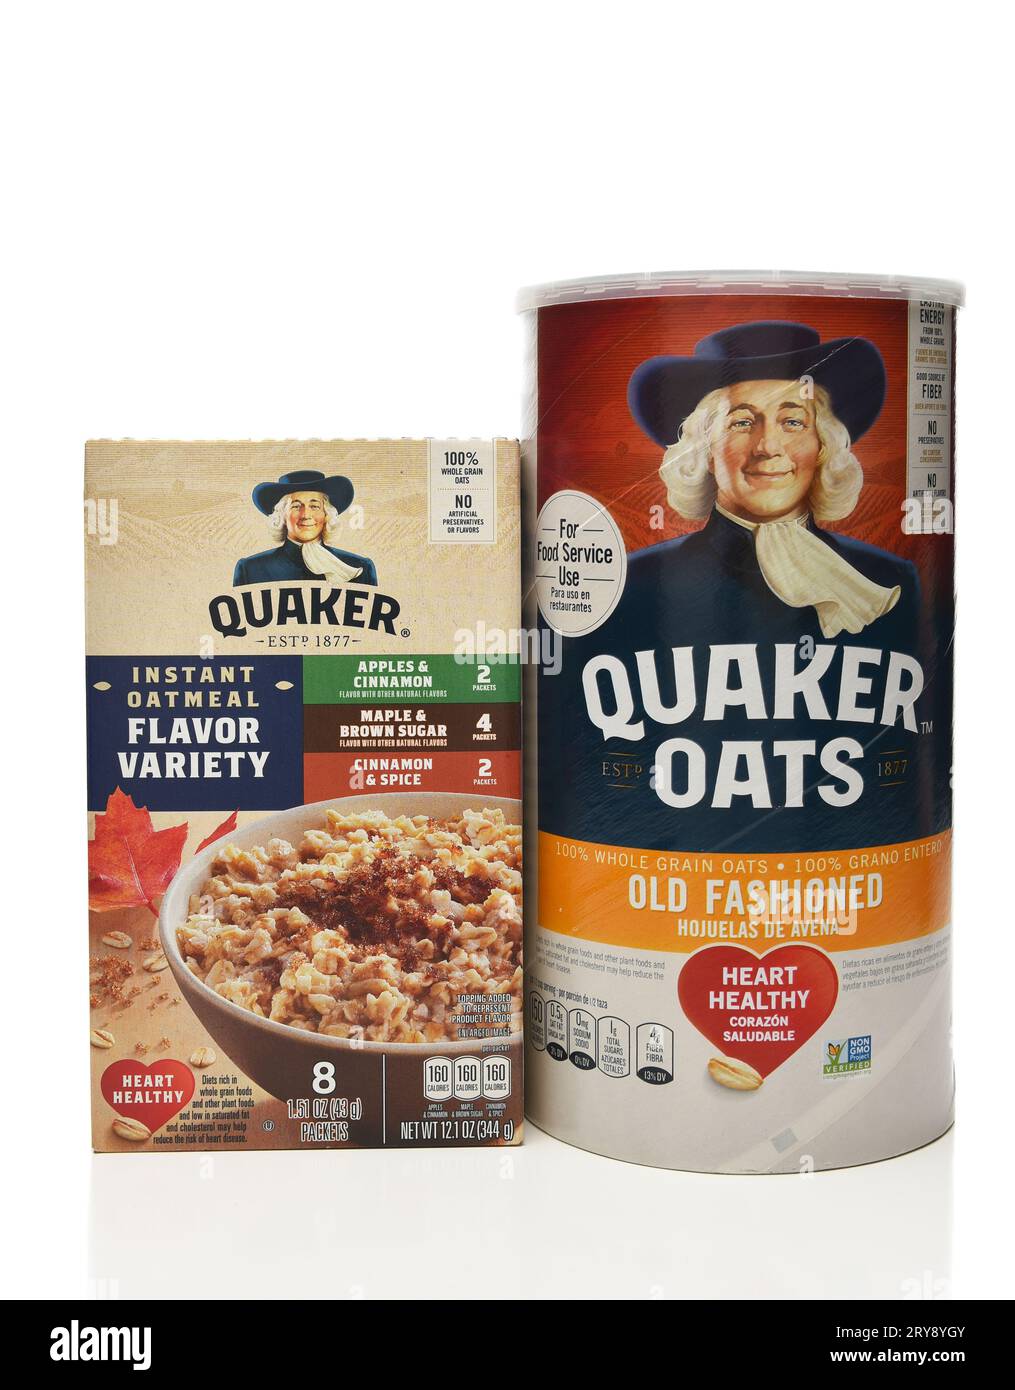 https://c8.alamy.com/comp/2RY8YGY/irivne-california-17-sept-2023-a-variety-of-quaker-oats-oatmeal-old-fashioned-and-instant-2RY8YGY.jpg